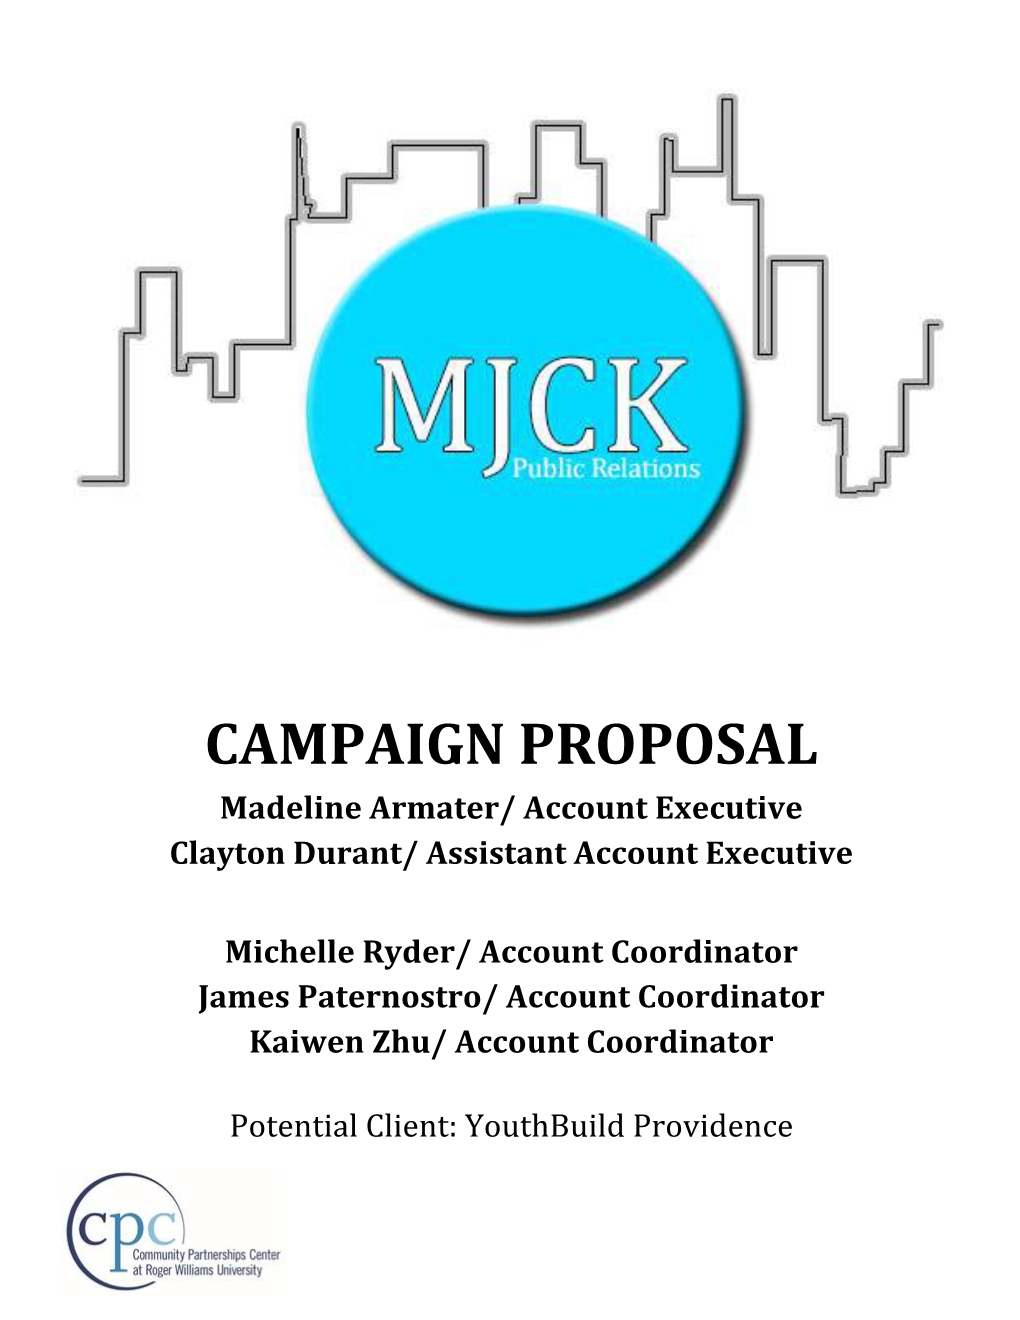 CAMPAIGN PROPOSAL Madeline Armater/ Account Executive Clayton Durant/ Assistant Account Executive